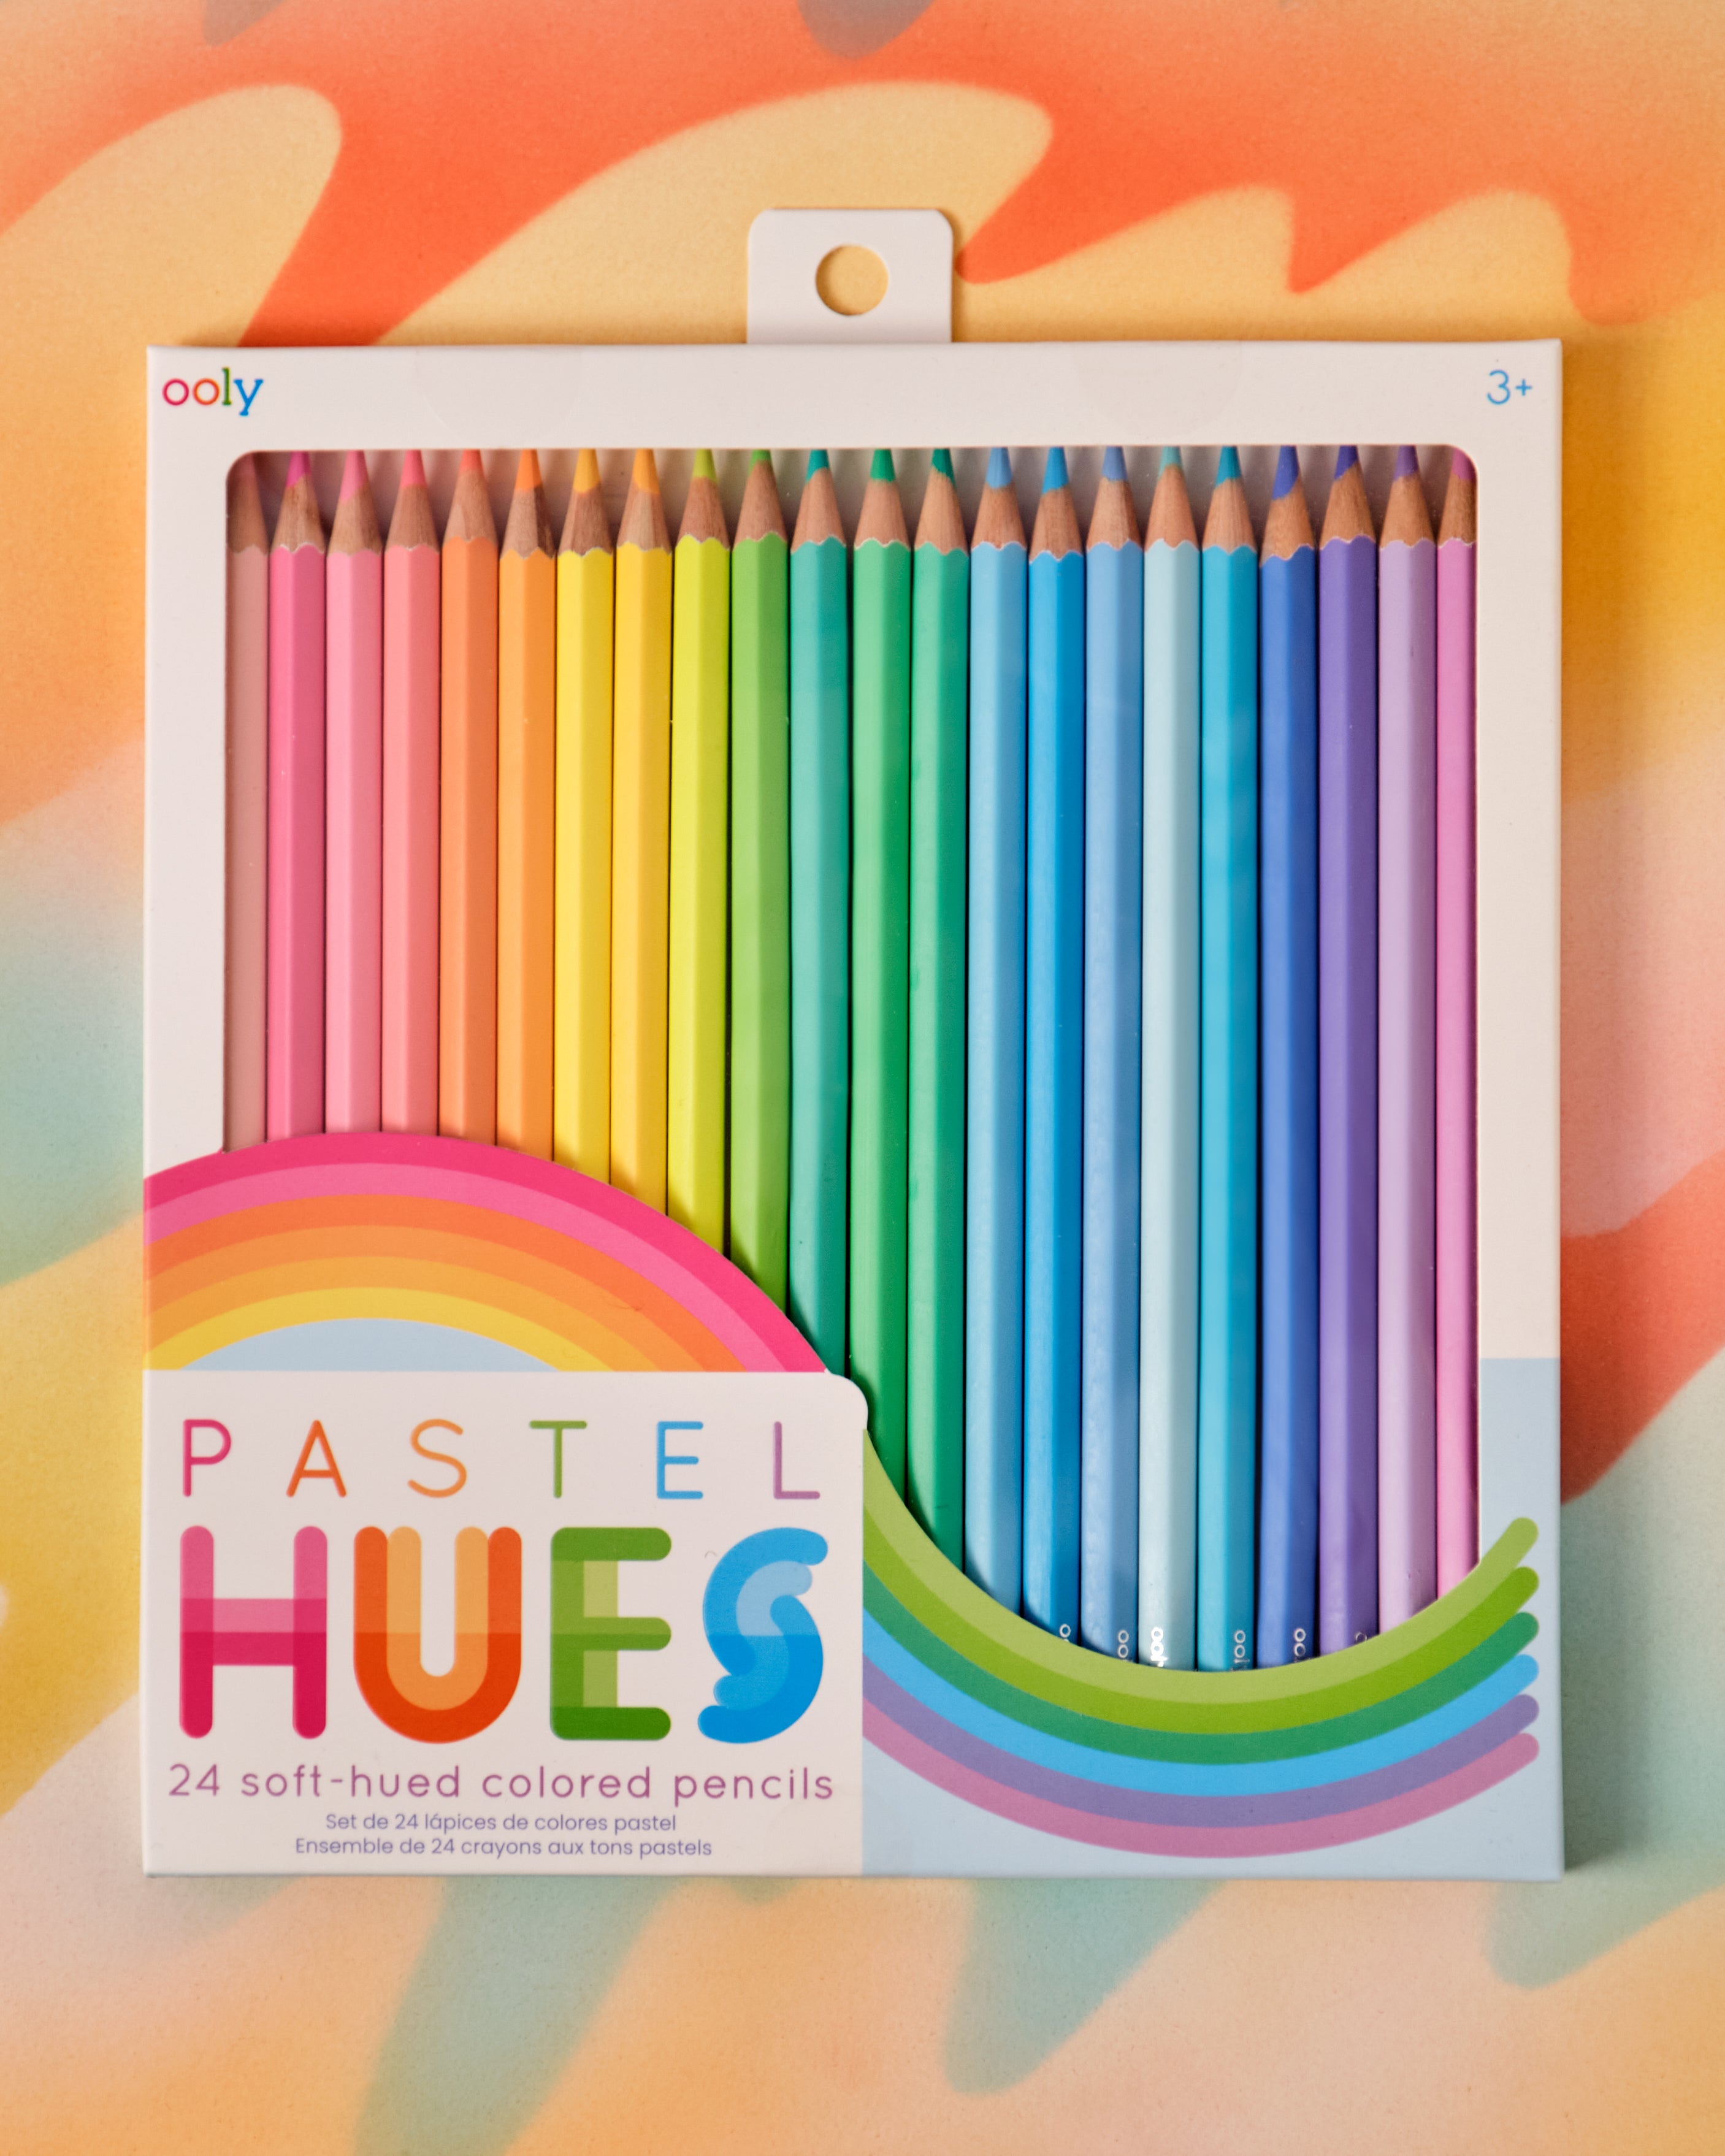 Ooly Pastel Hues Colored Pencil Set of 24 – Crush